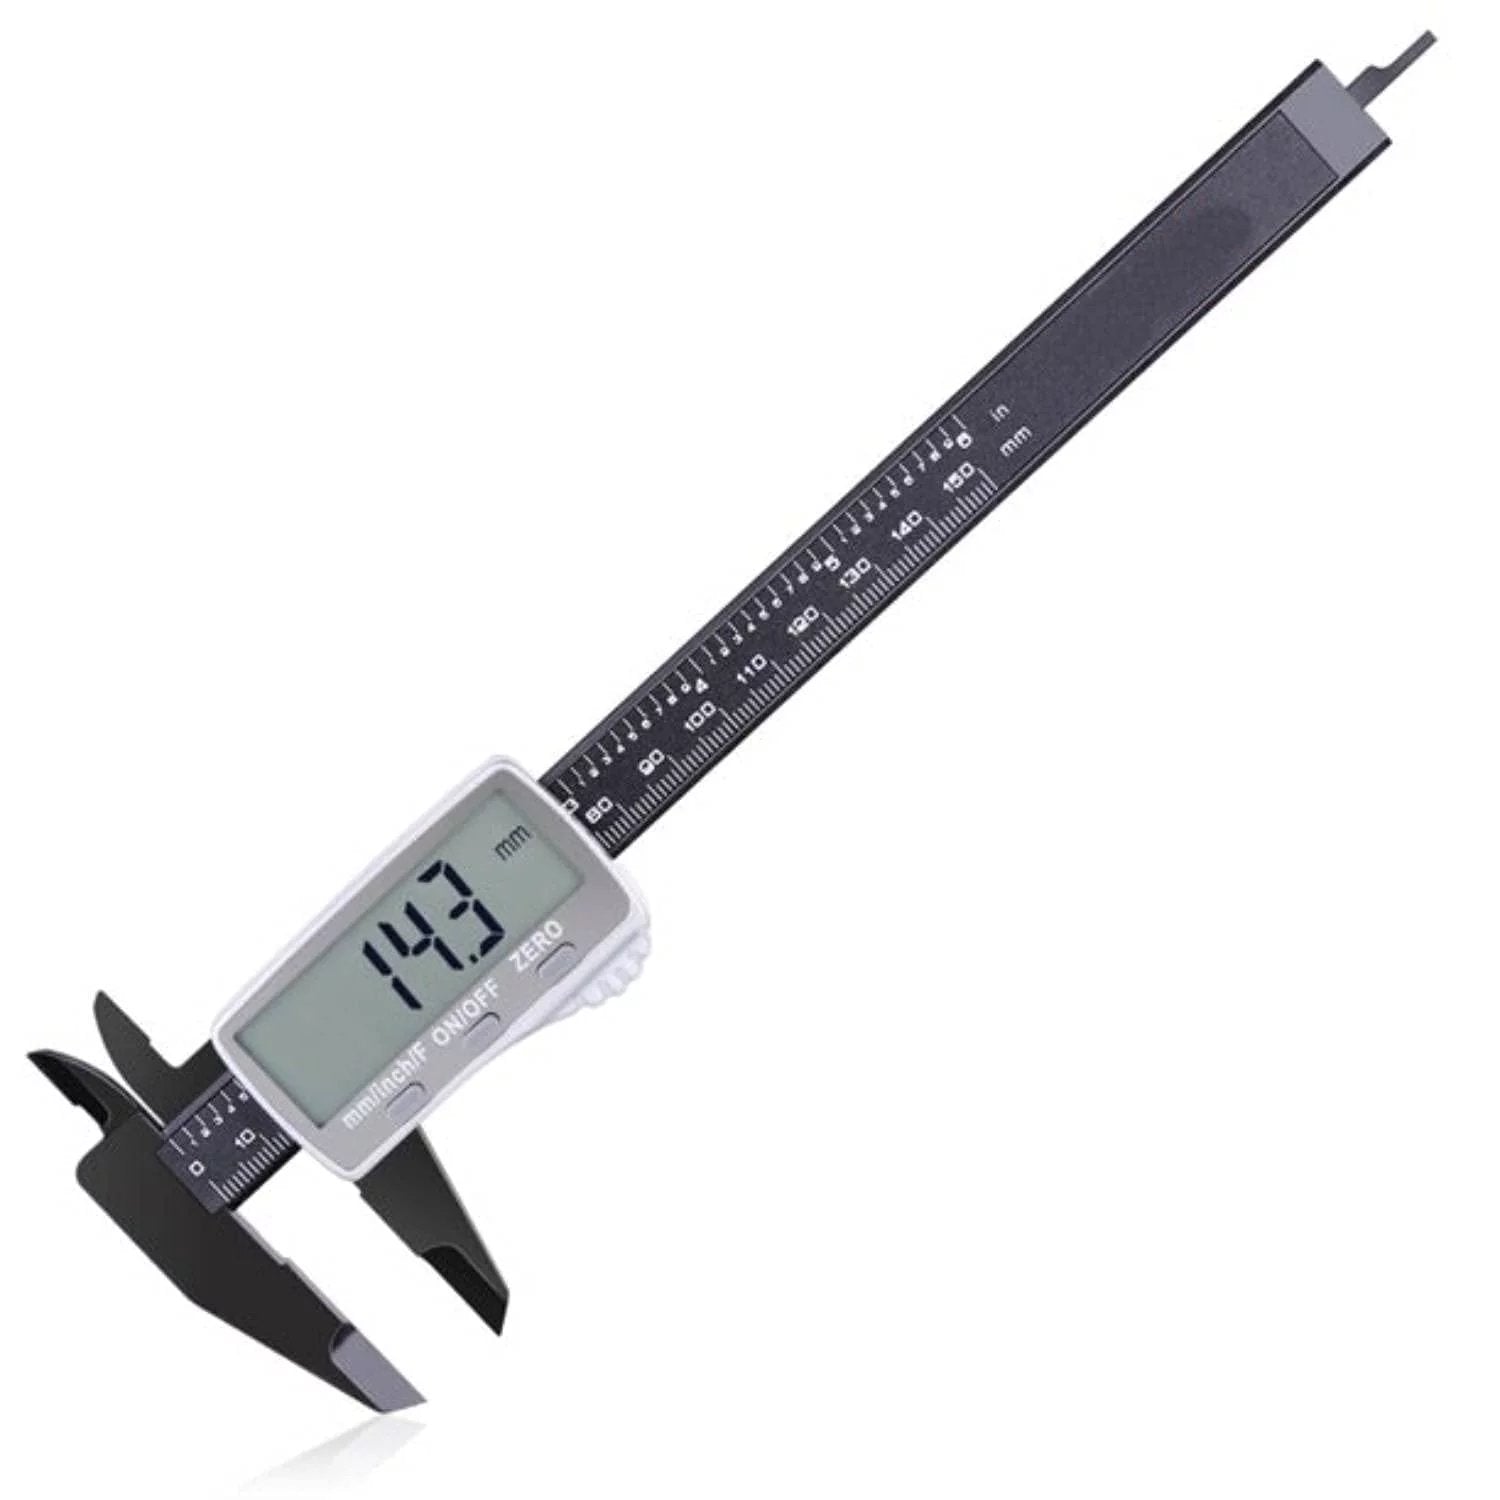 6" inch Digital Caliper Precision Measuring Tool with LCD Display Electronic Vernier 150mm